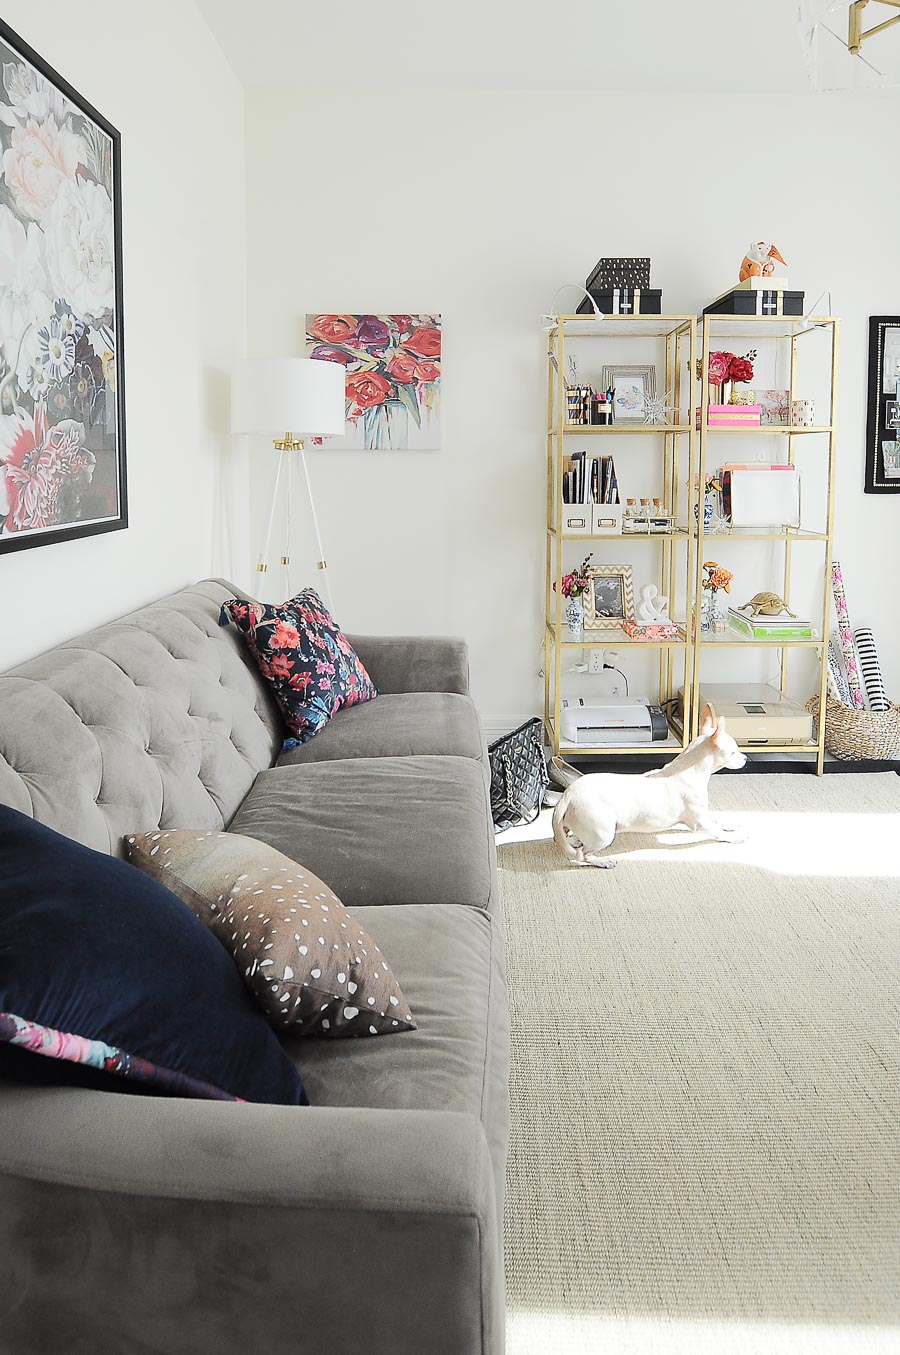 A small sofa serves as seating in this bright white and gold home office makeover.